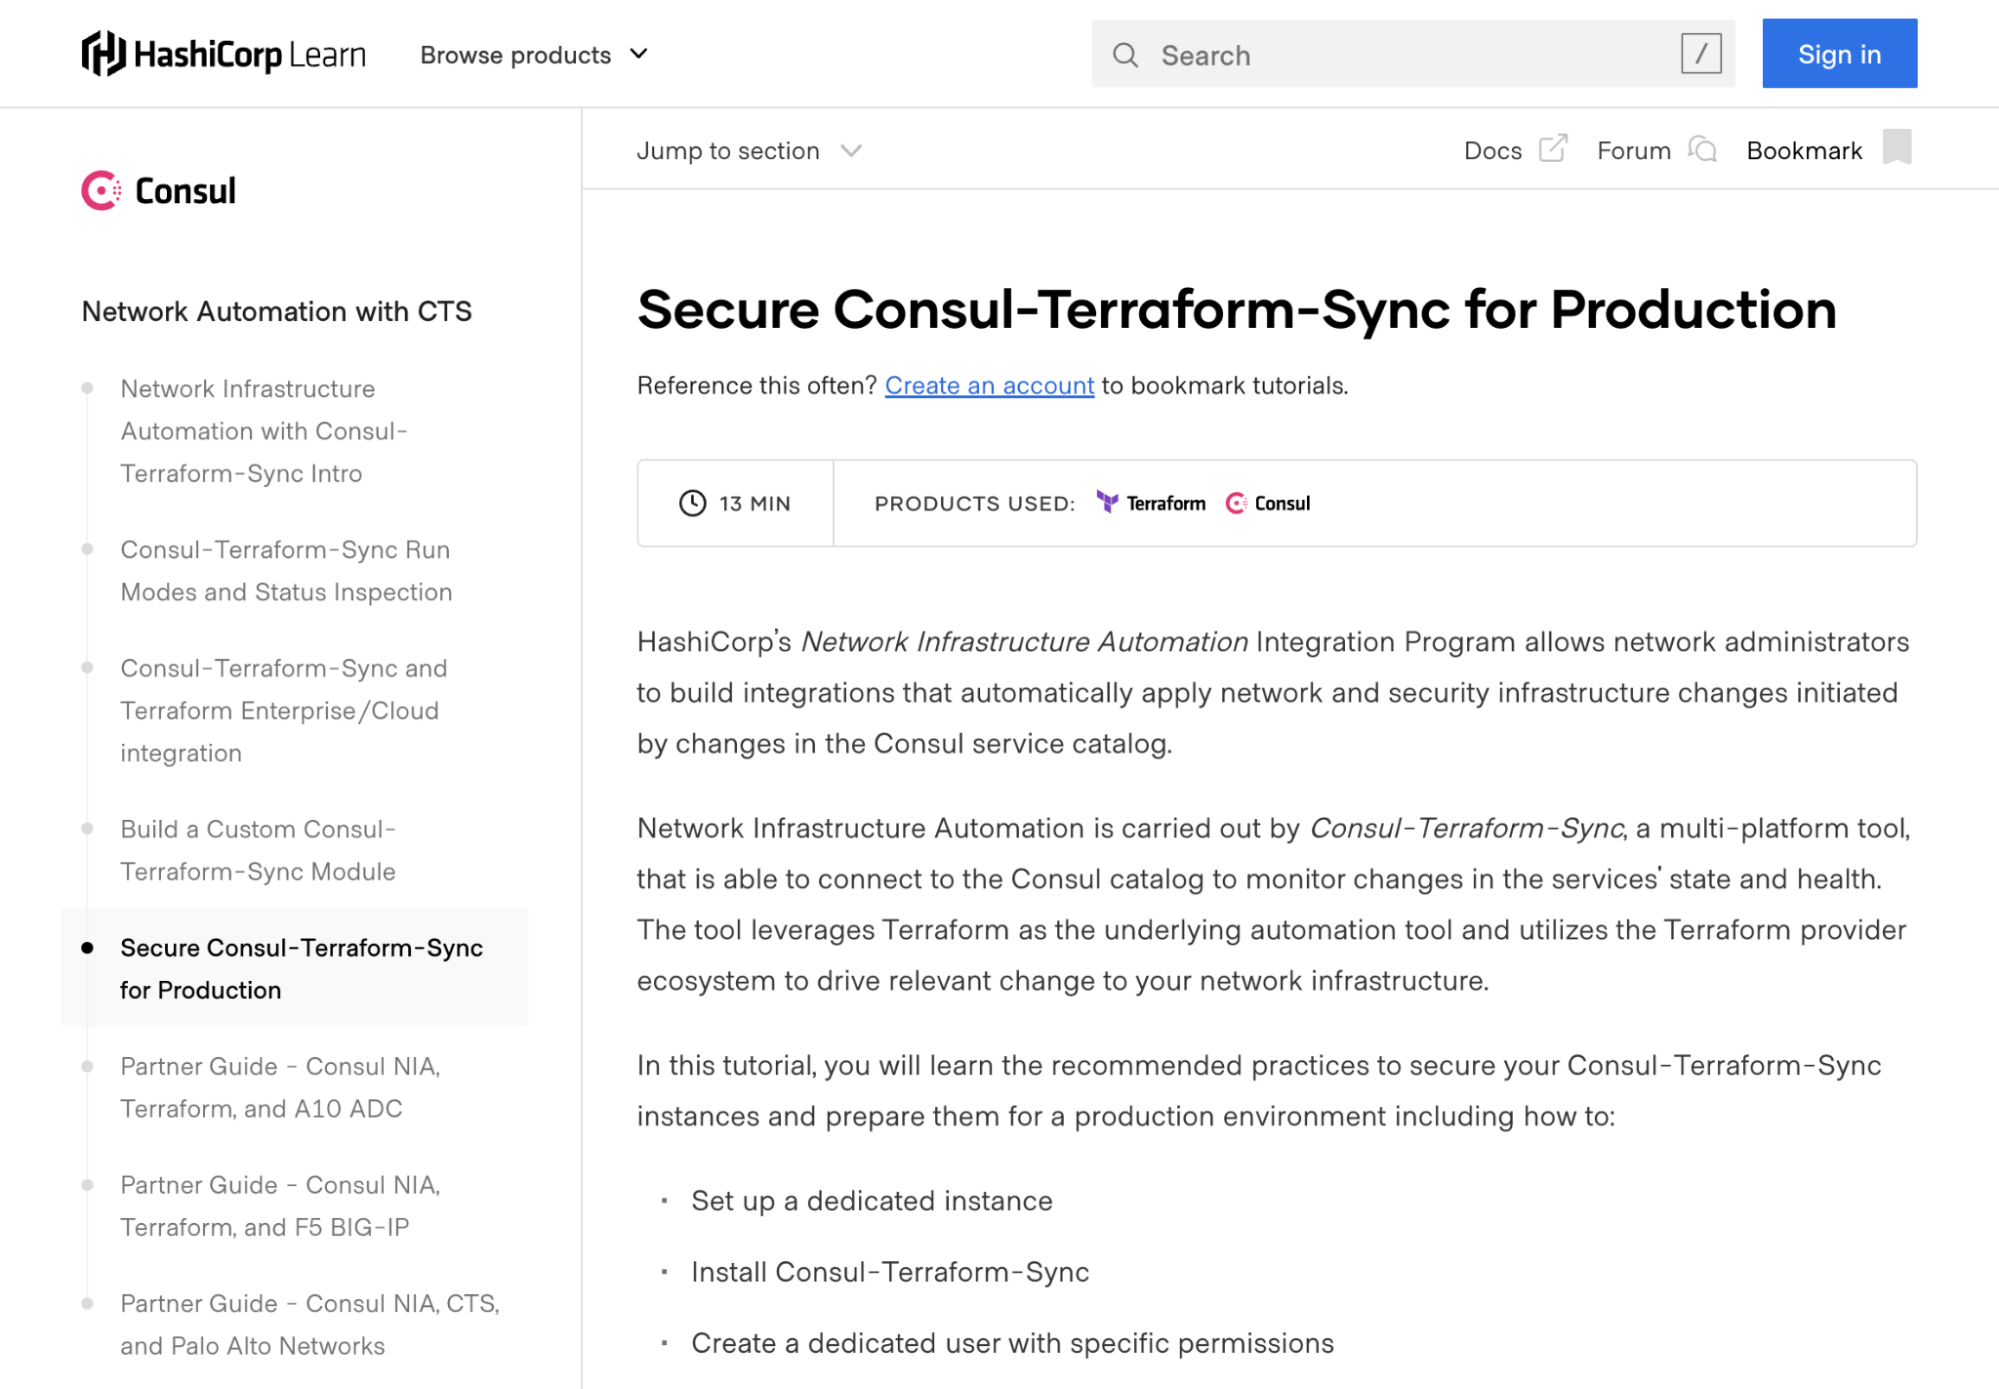 The Secure Consul-Terraform-Sync tutorial shows how to integrate HCP Consul with CTS v0.6.0.